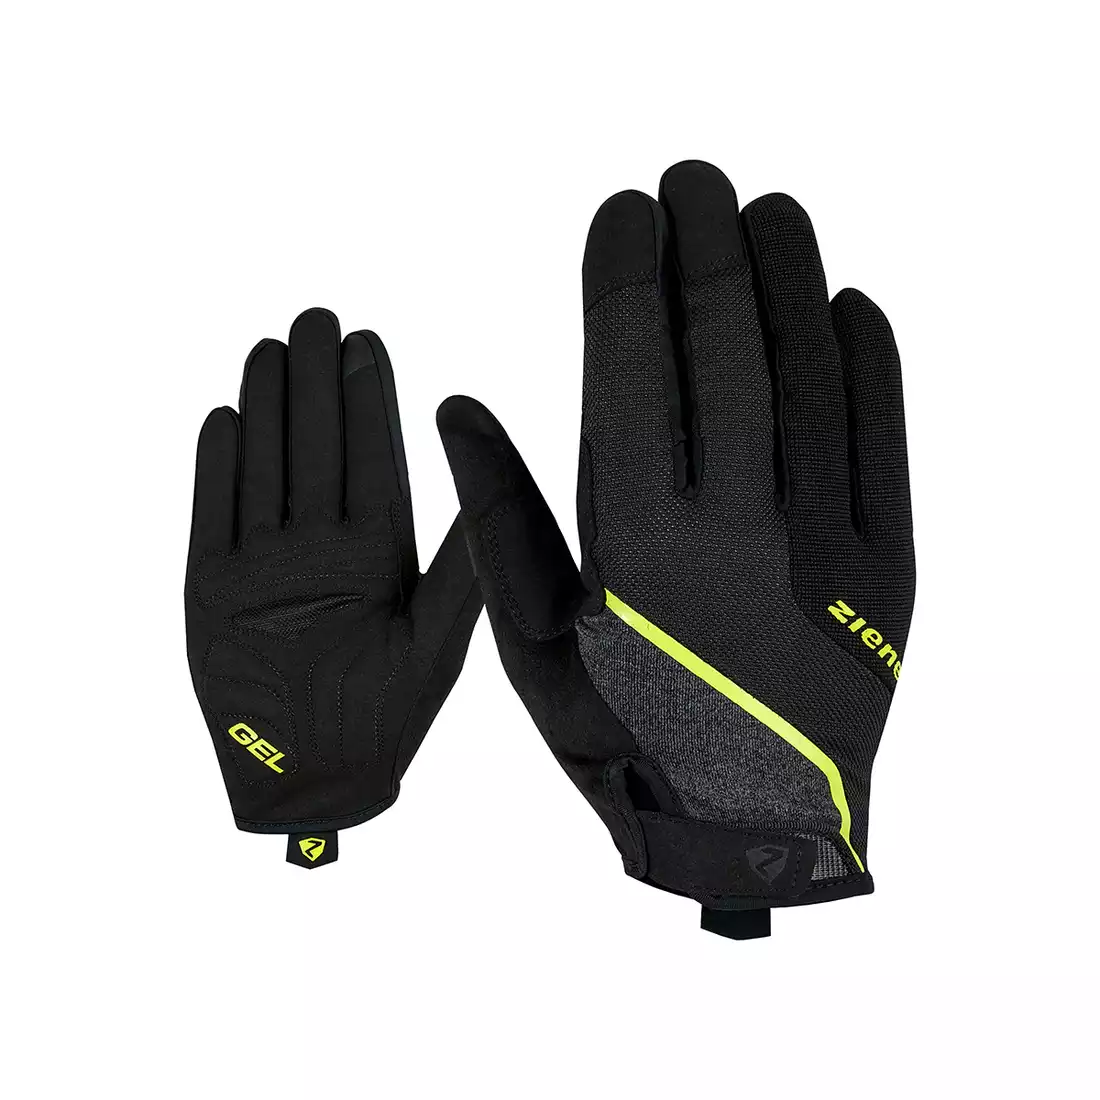 ZIENER CLYO TOUCH LONG cycling gloves, black and yellow